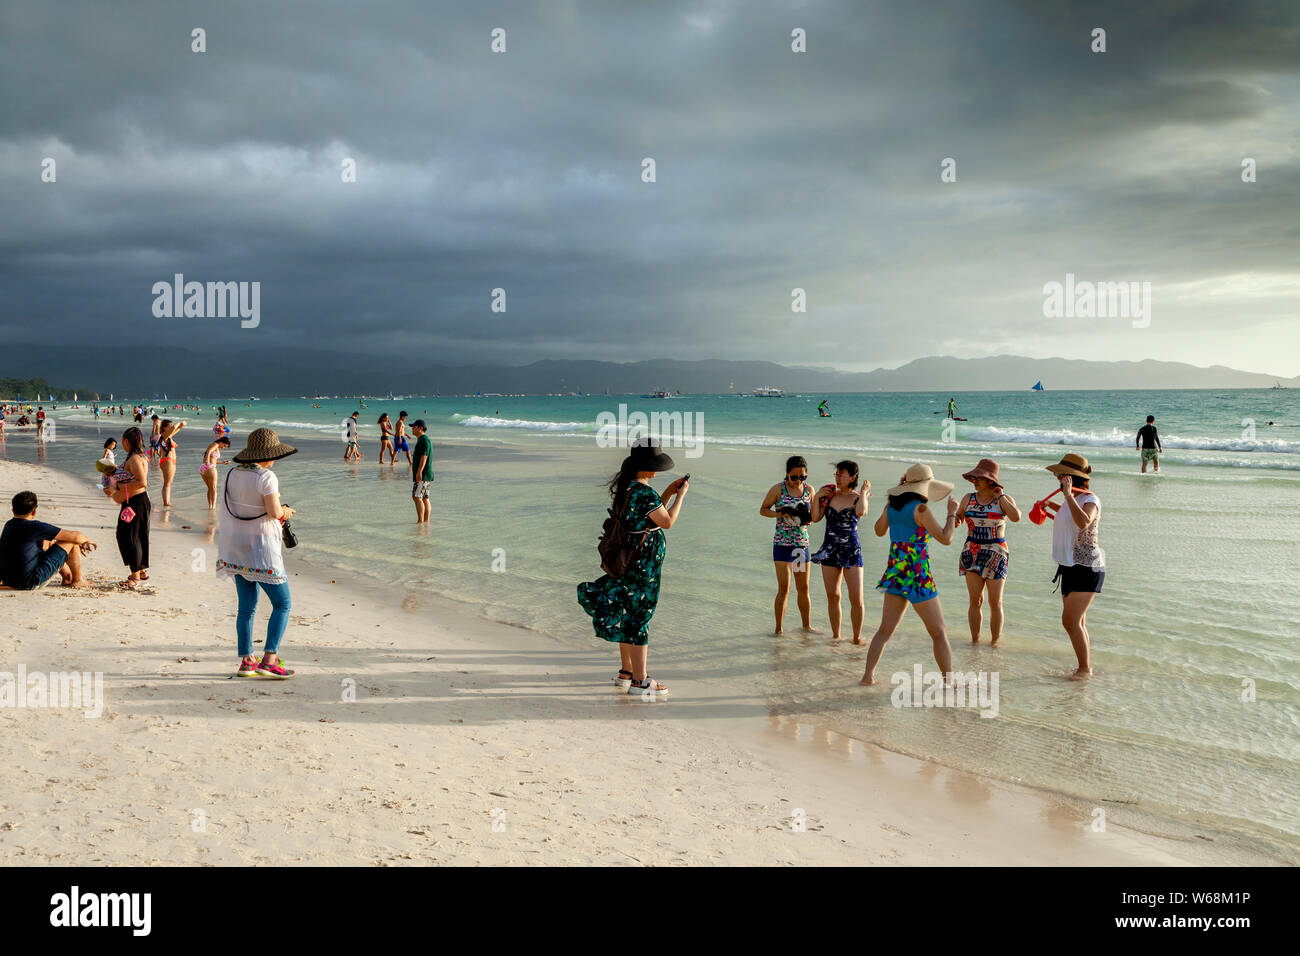 A Group Of Chinese Tourists At White Beach, Boracay, Aklan, The Philippines Stock Photo